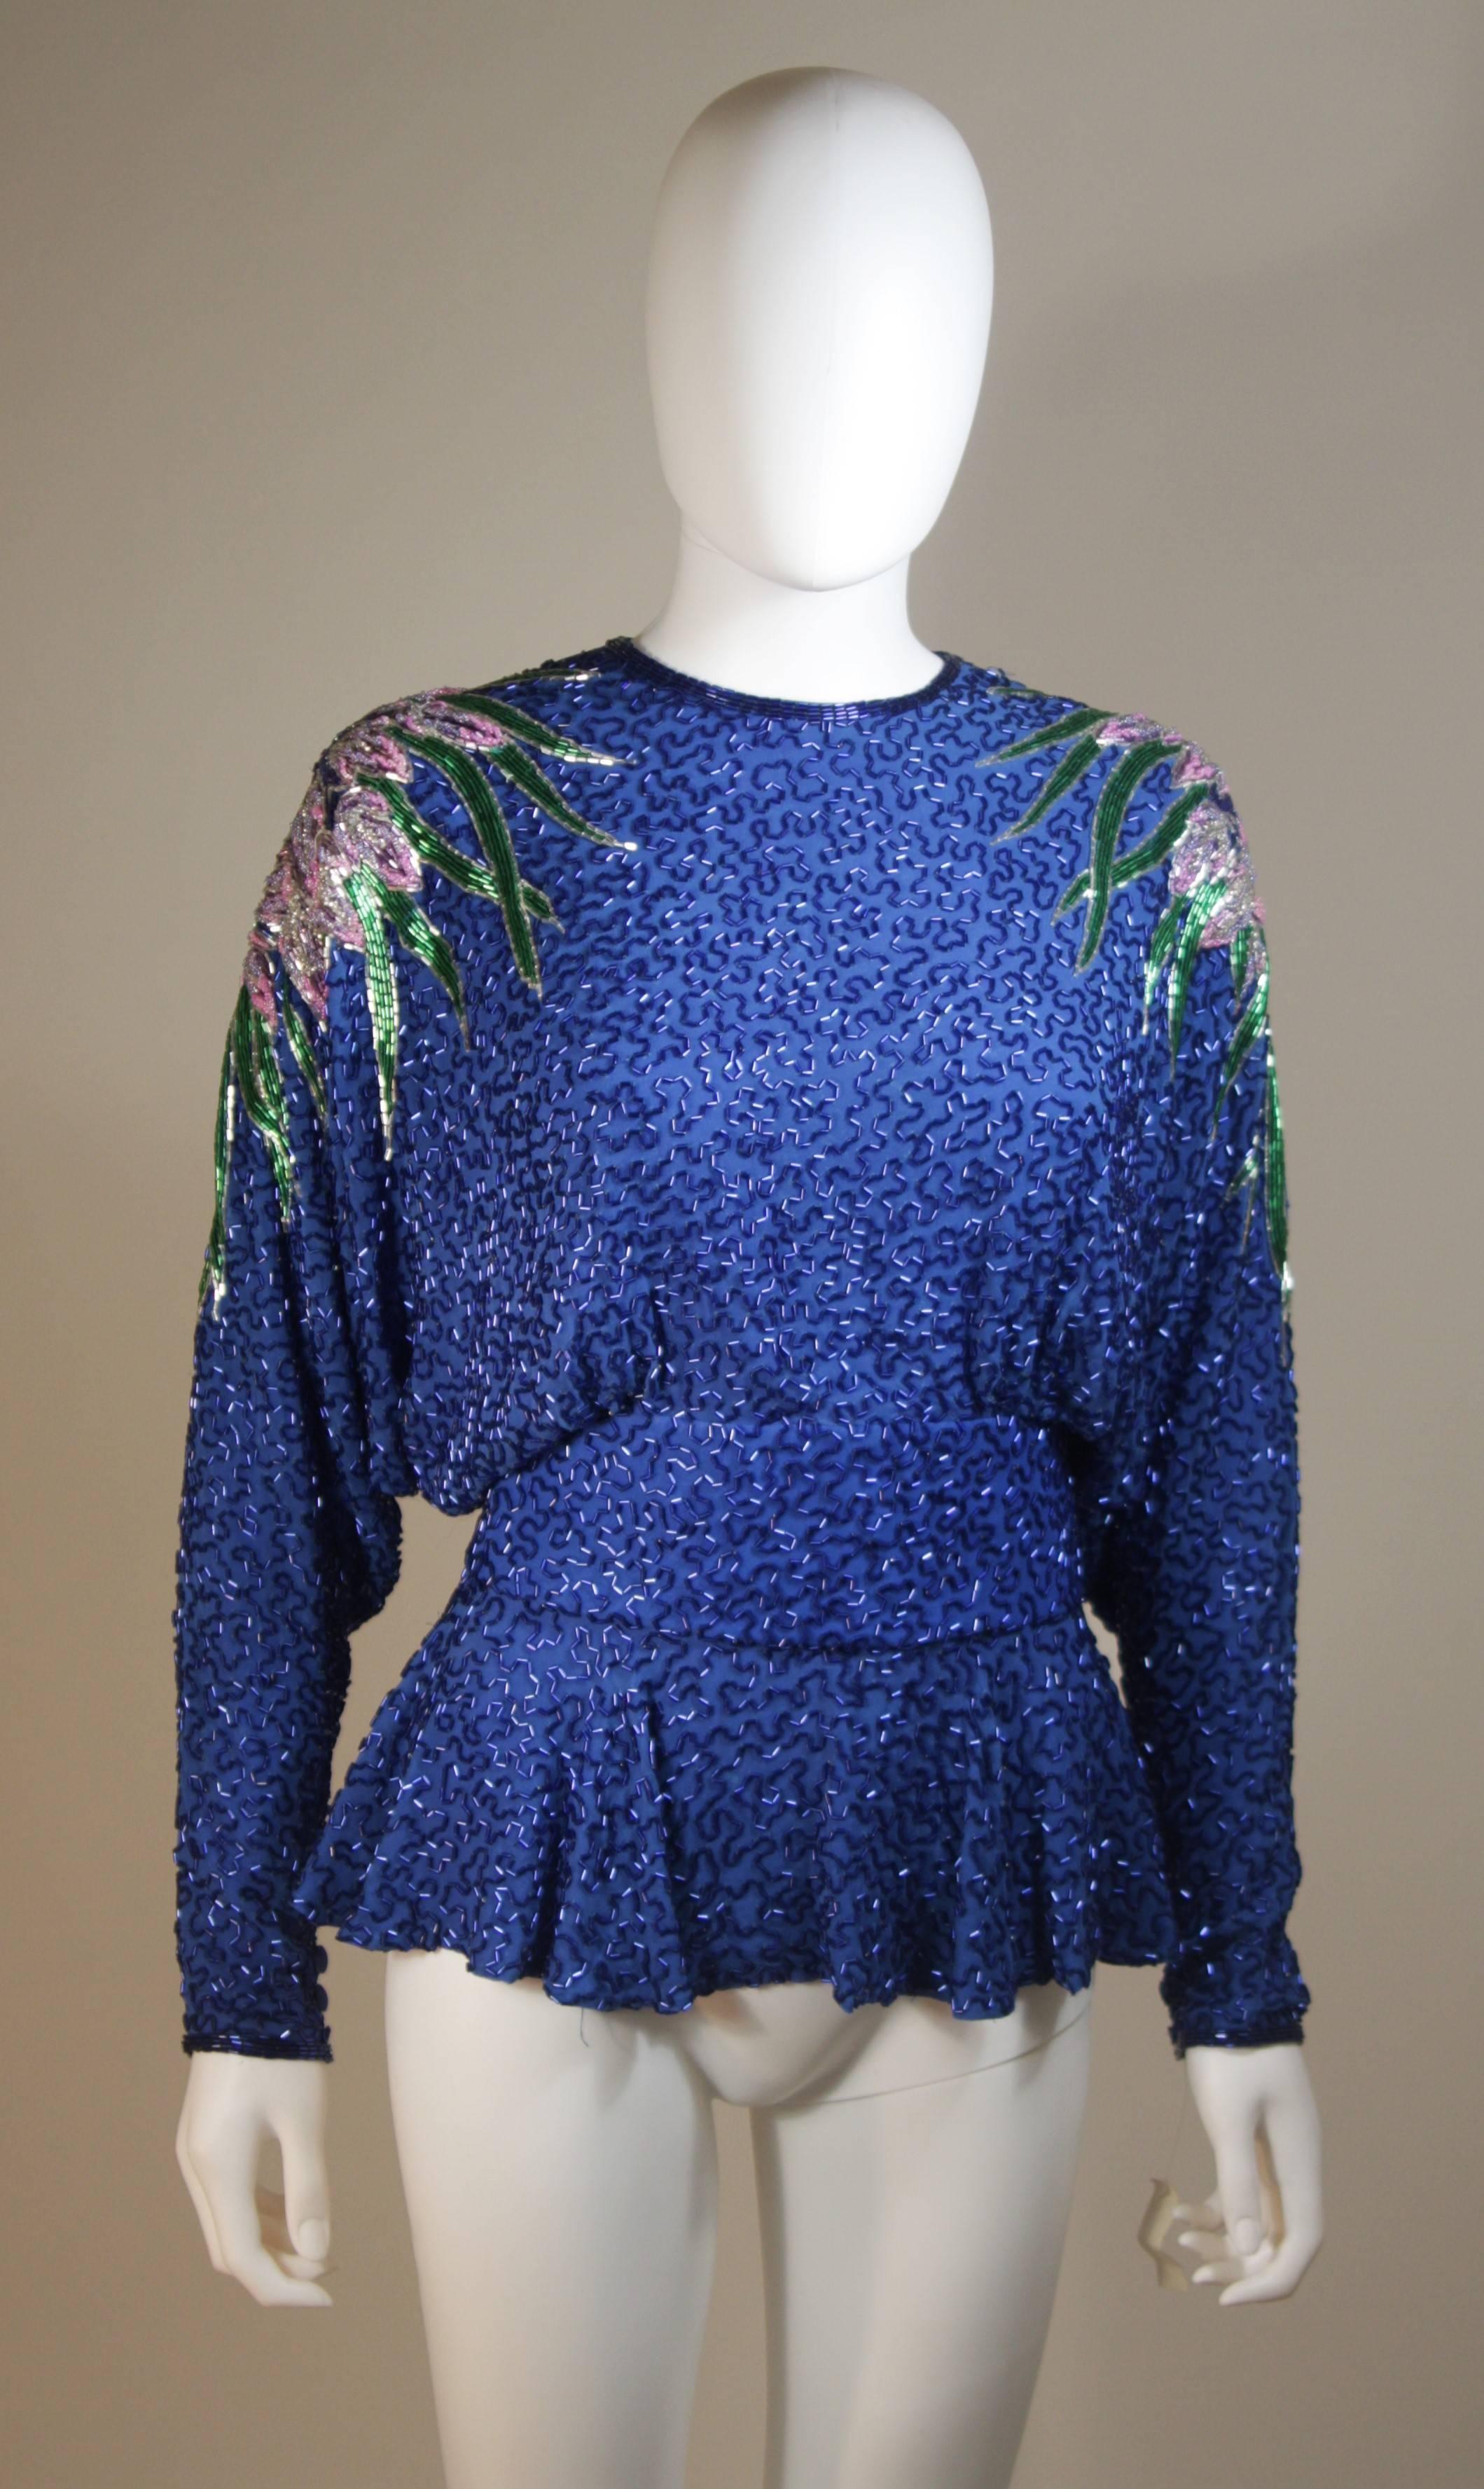 This Stephen Yearik top is composed of a heavily embellished silk top with dolman style sleeves in a vibrant blue hue. There are center back button closures. In great vintage condition.

  **Please cross-reference measurements for personal accuracy.